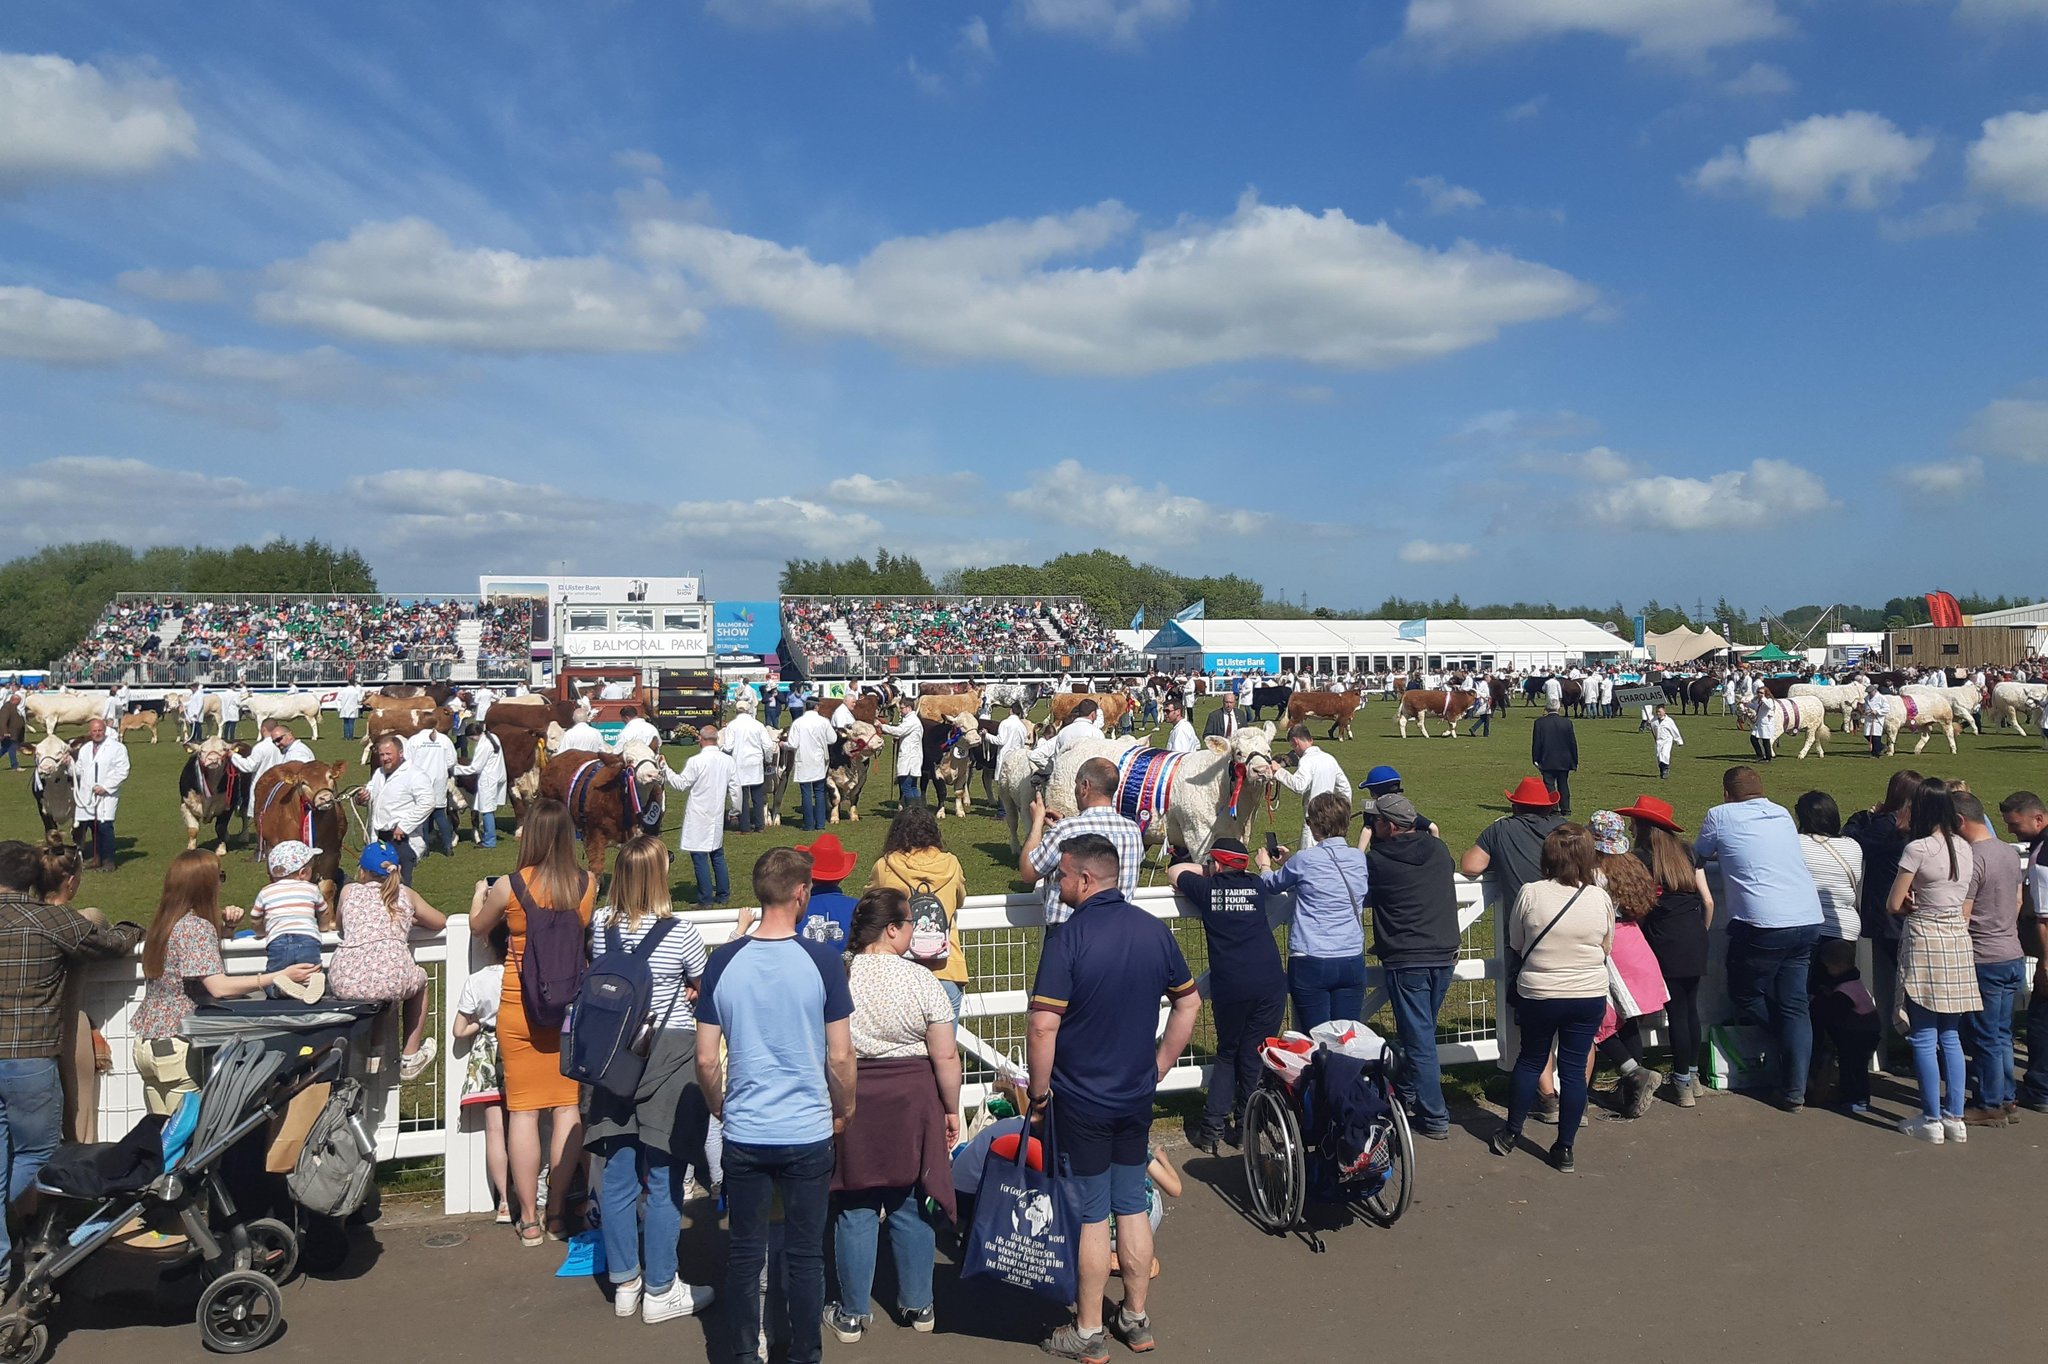 Video: Cattle parade Balmoral Show 2022